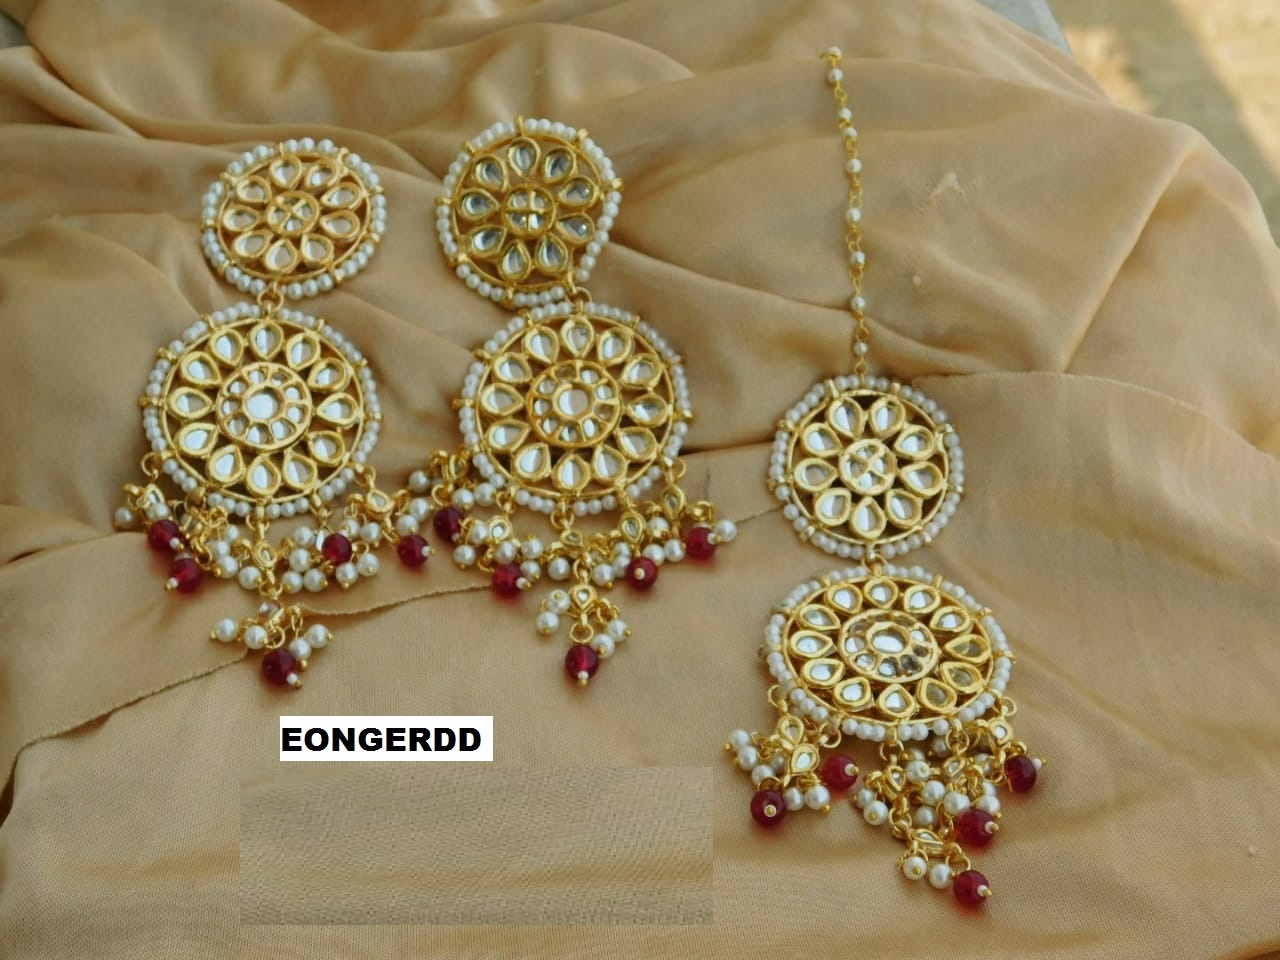 Details about   Ethnic Indian Fashion Cz Maang Tikka Earring Set Bollywood Wedding Jewelry ej62 